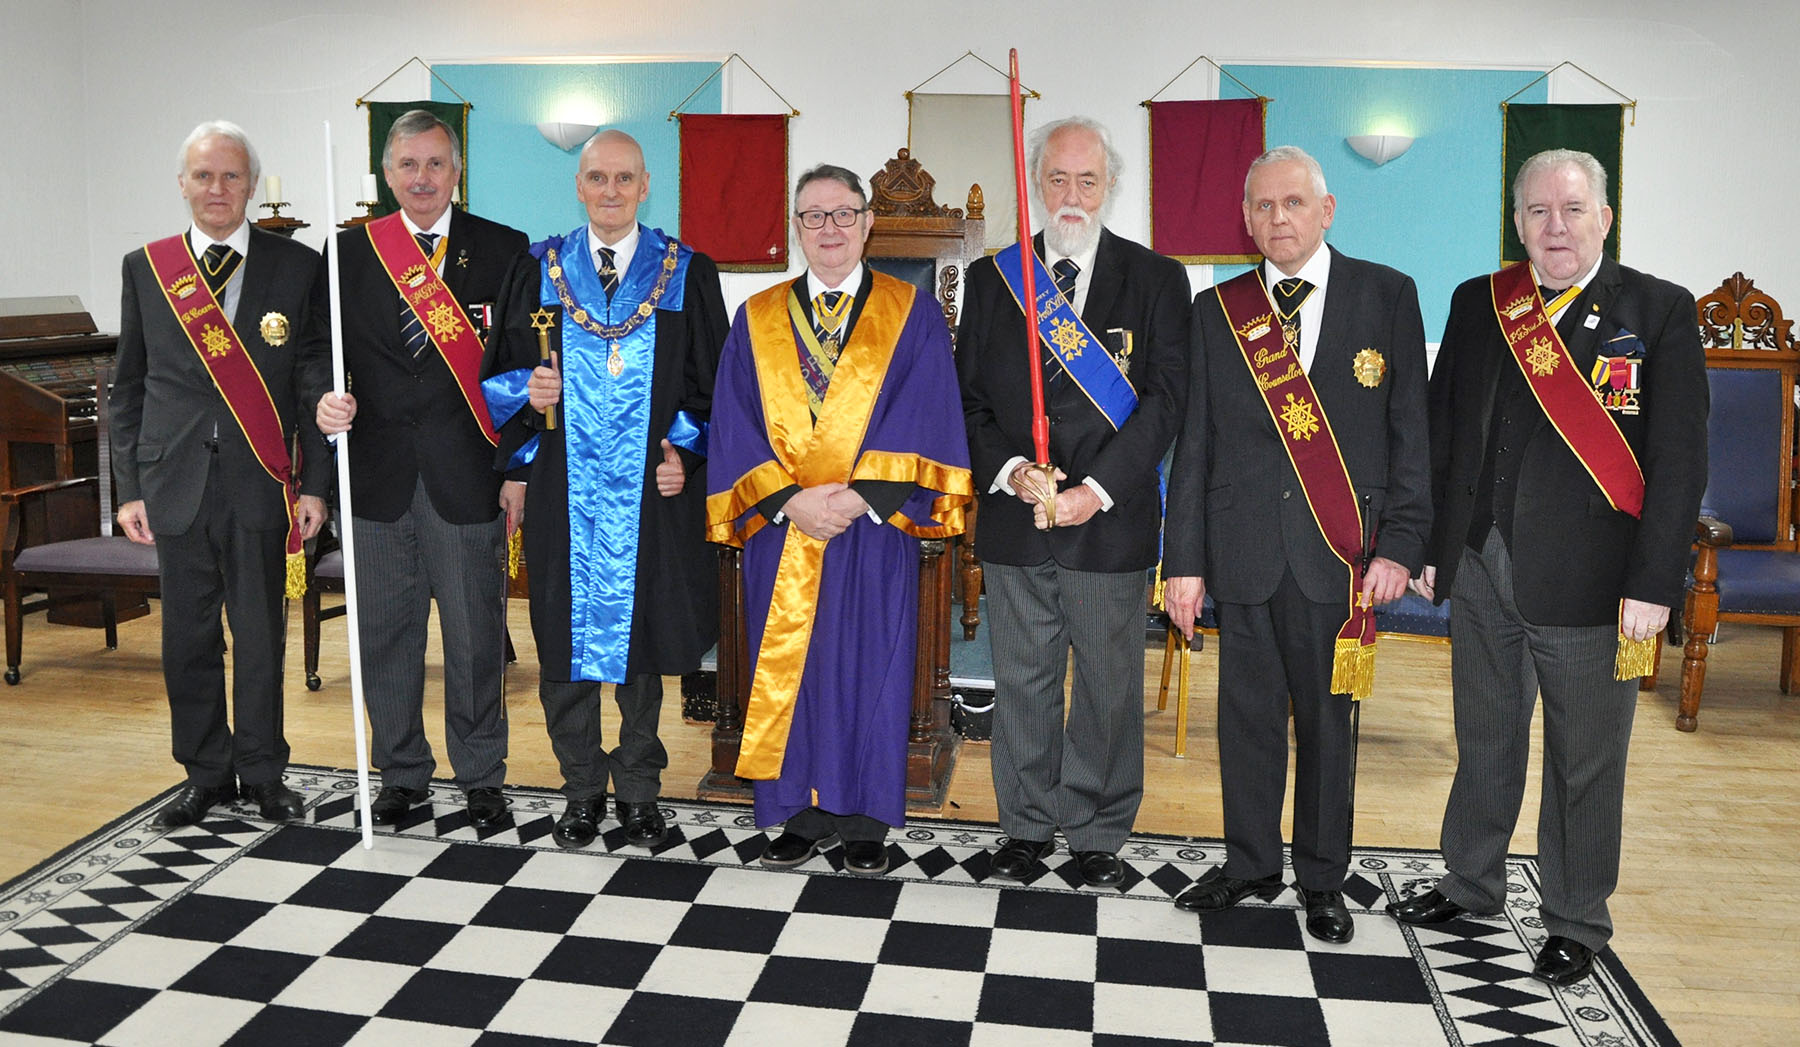 An Executive Visit to Hill of Zion Conclave